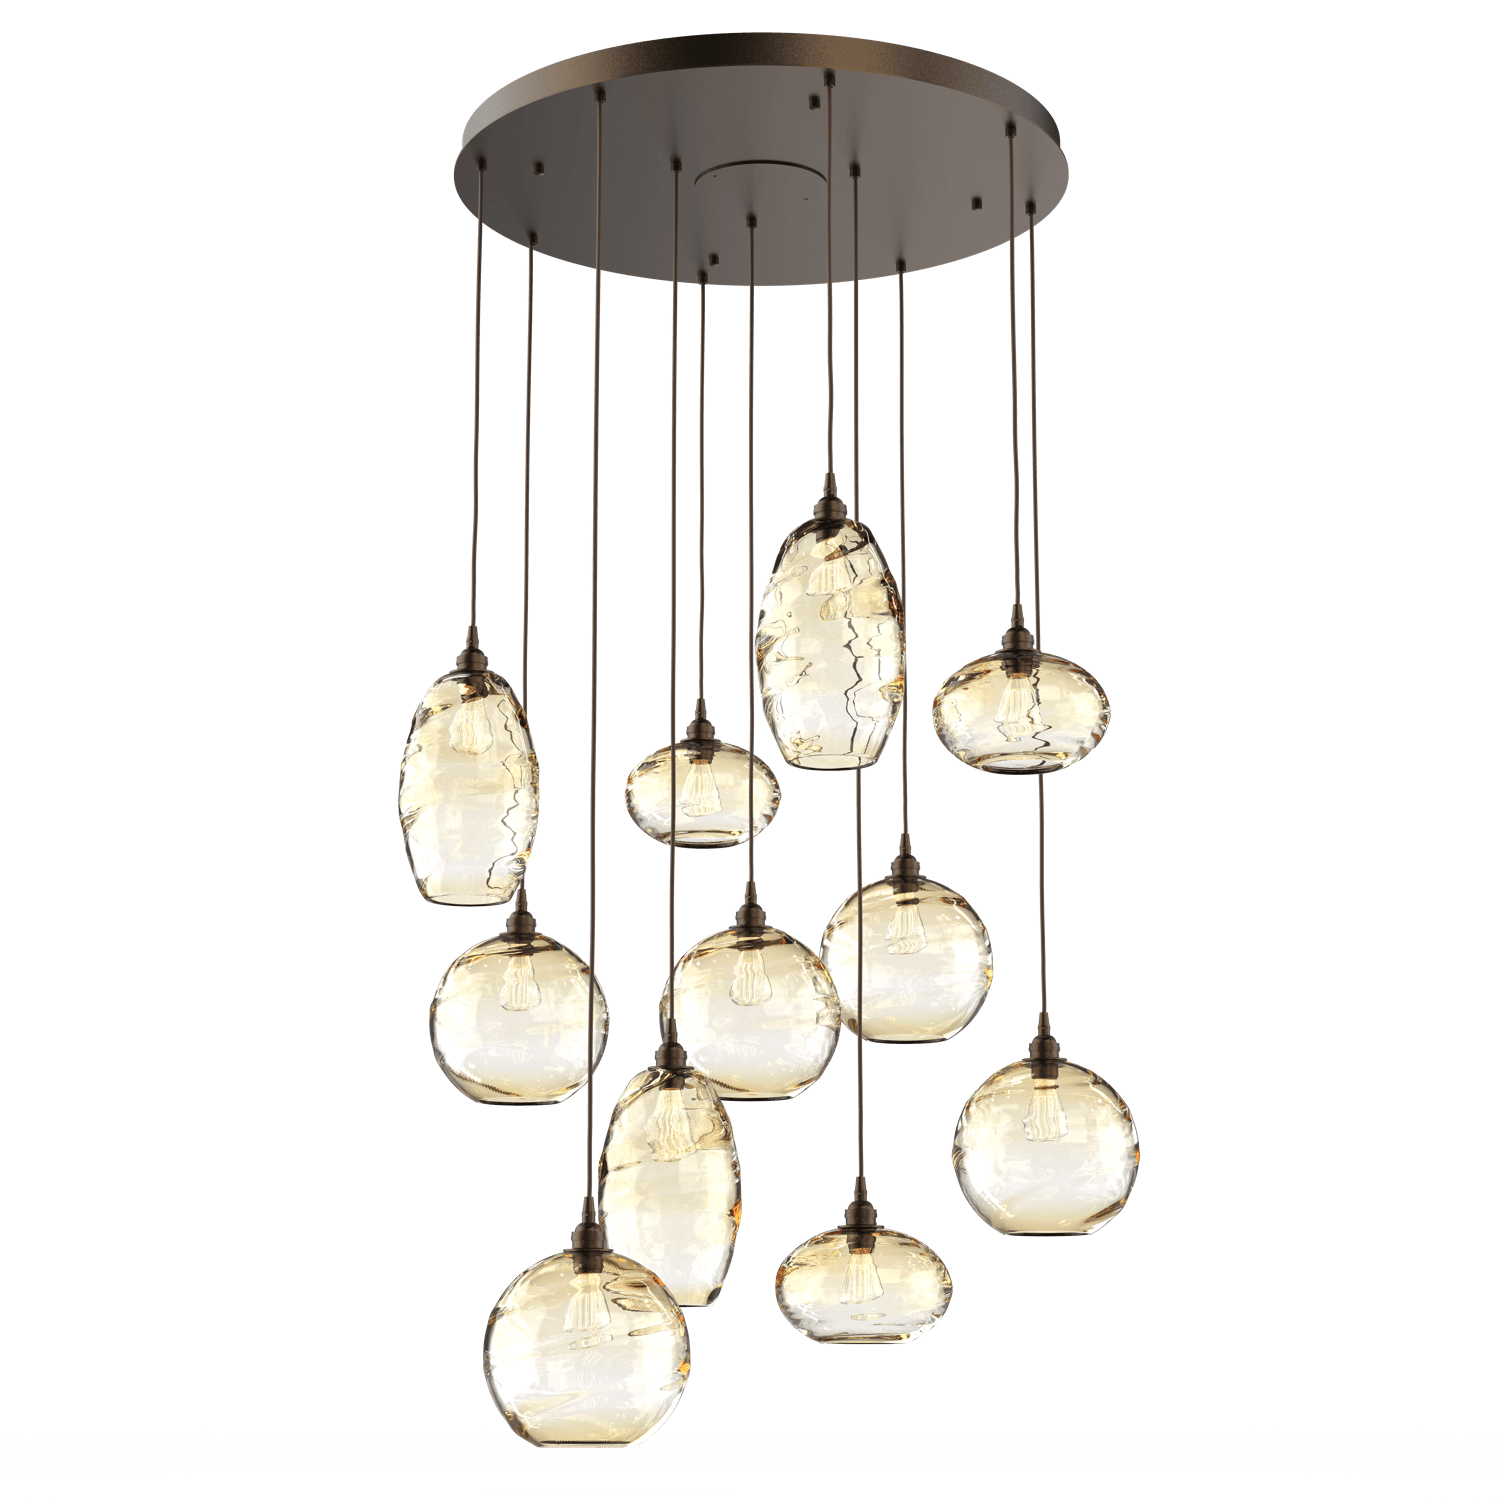 CHB0048-11-FB-OA-Hammerton-Studio-Optic-Blown-Glass-Misto-11-light-round-pendant-chandelier-with-flat-bronze-finish-and-optic-amber-blown-glass-shades-and-incandescent-lamping